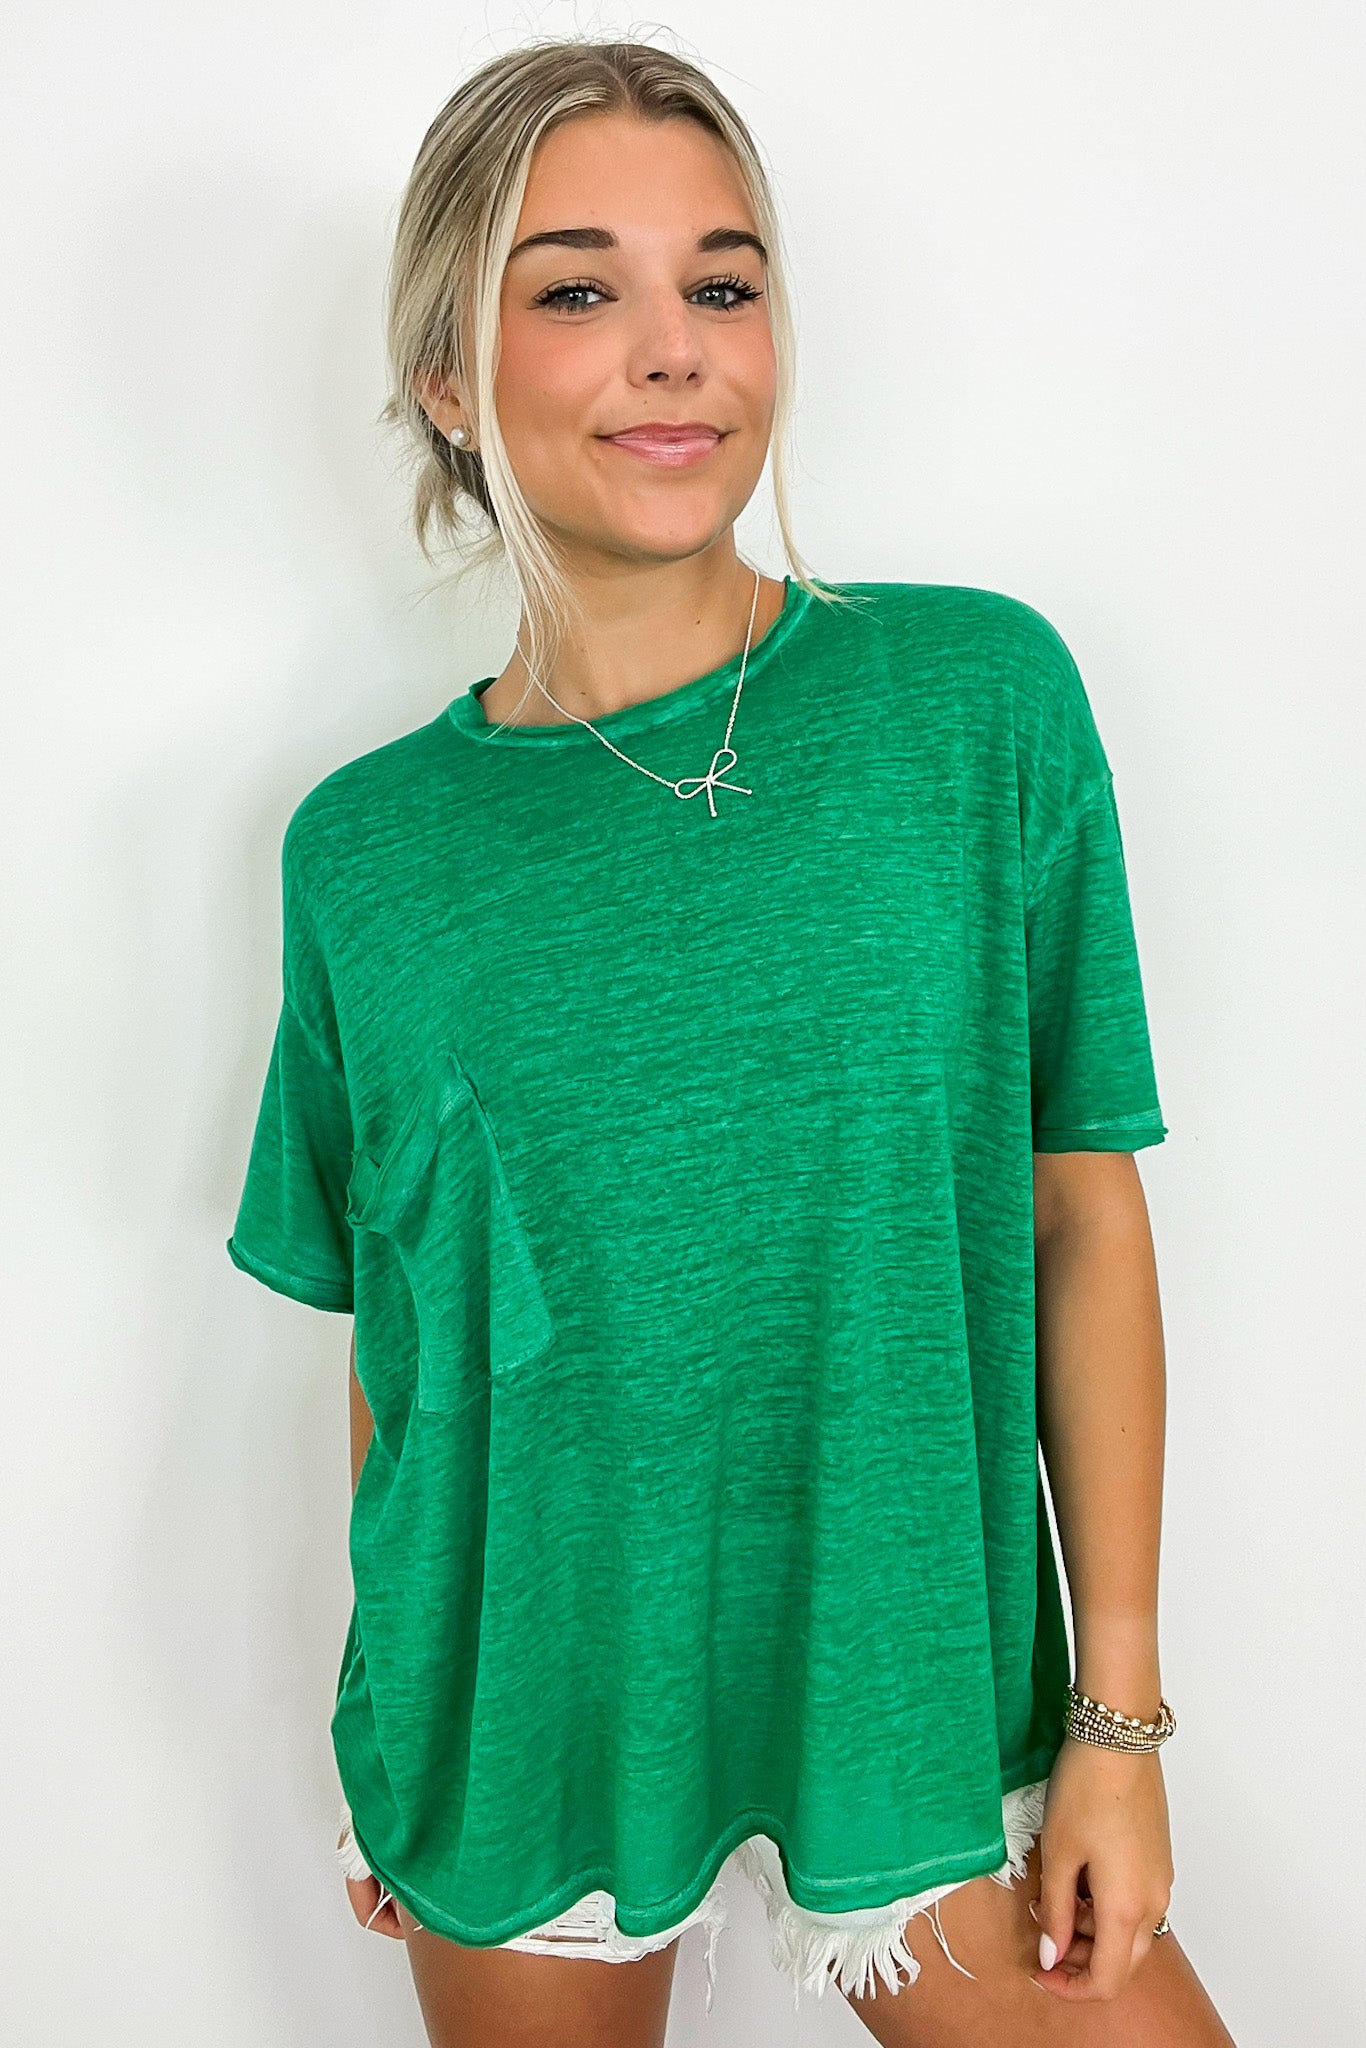 Kelly Green / SM Marisol Burnout Wash Oversized Pocket Top - BACK IN STOCK - Madison and Mallory